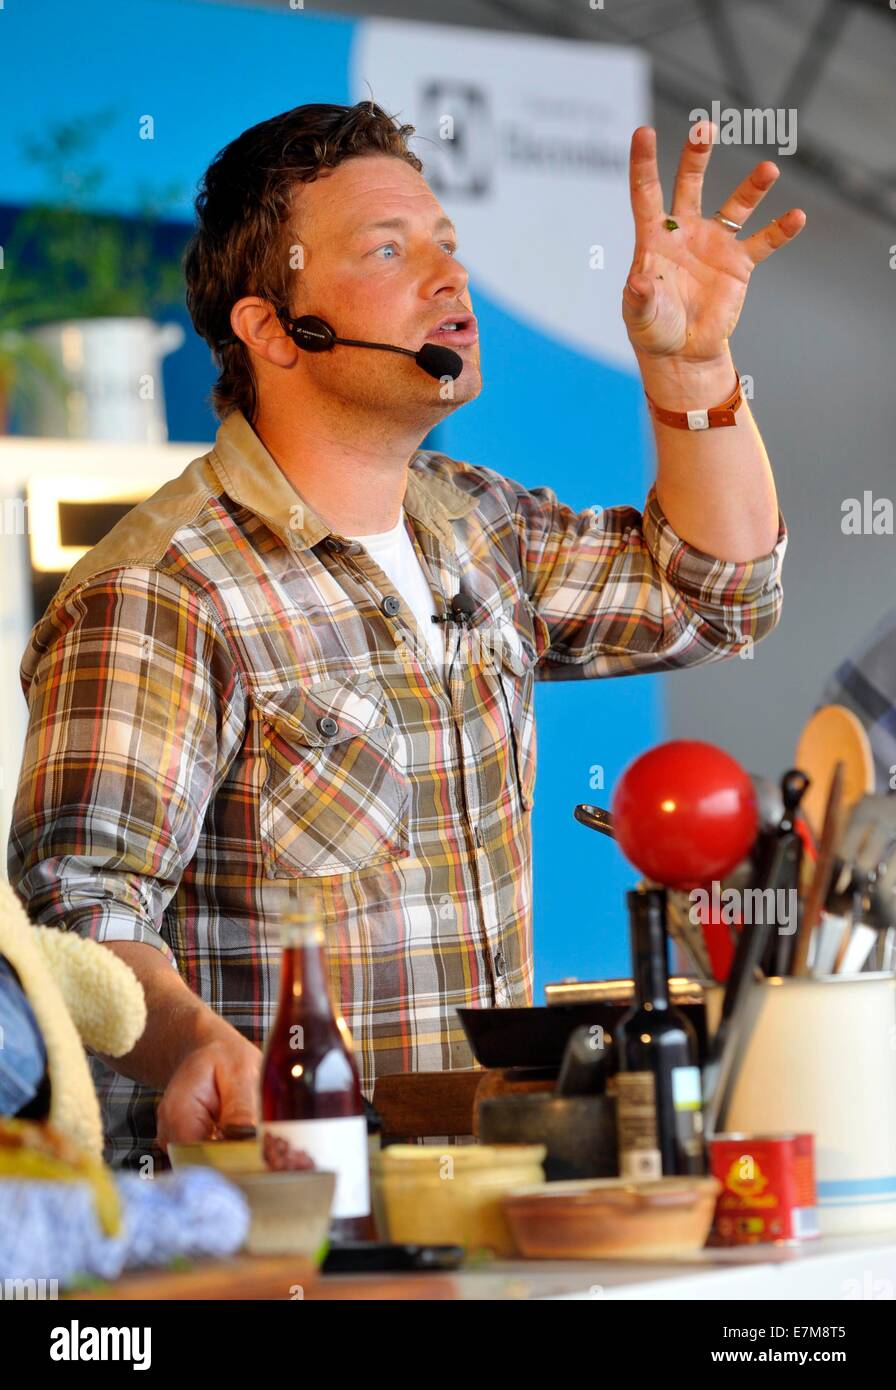 Jamie Oliver cooking demo in The Big Kitchen at the big feastival held at Alex James? farm near Kingham, Oxfordshire 01/09/2012 Stock Photo